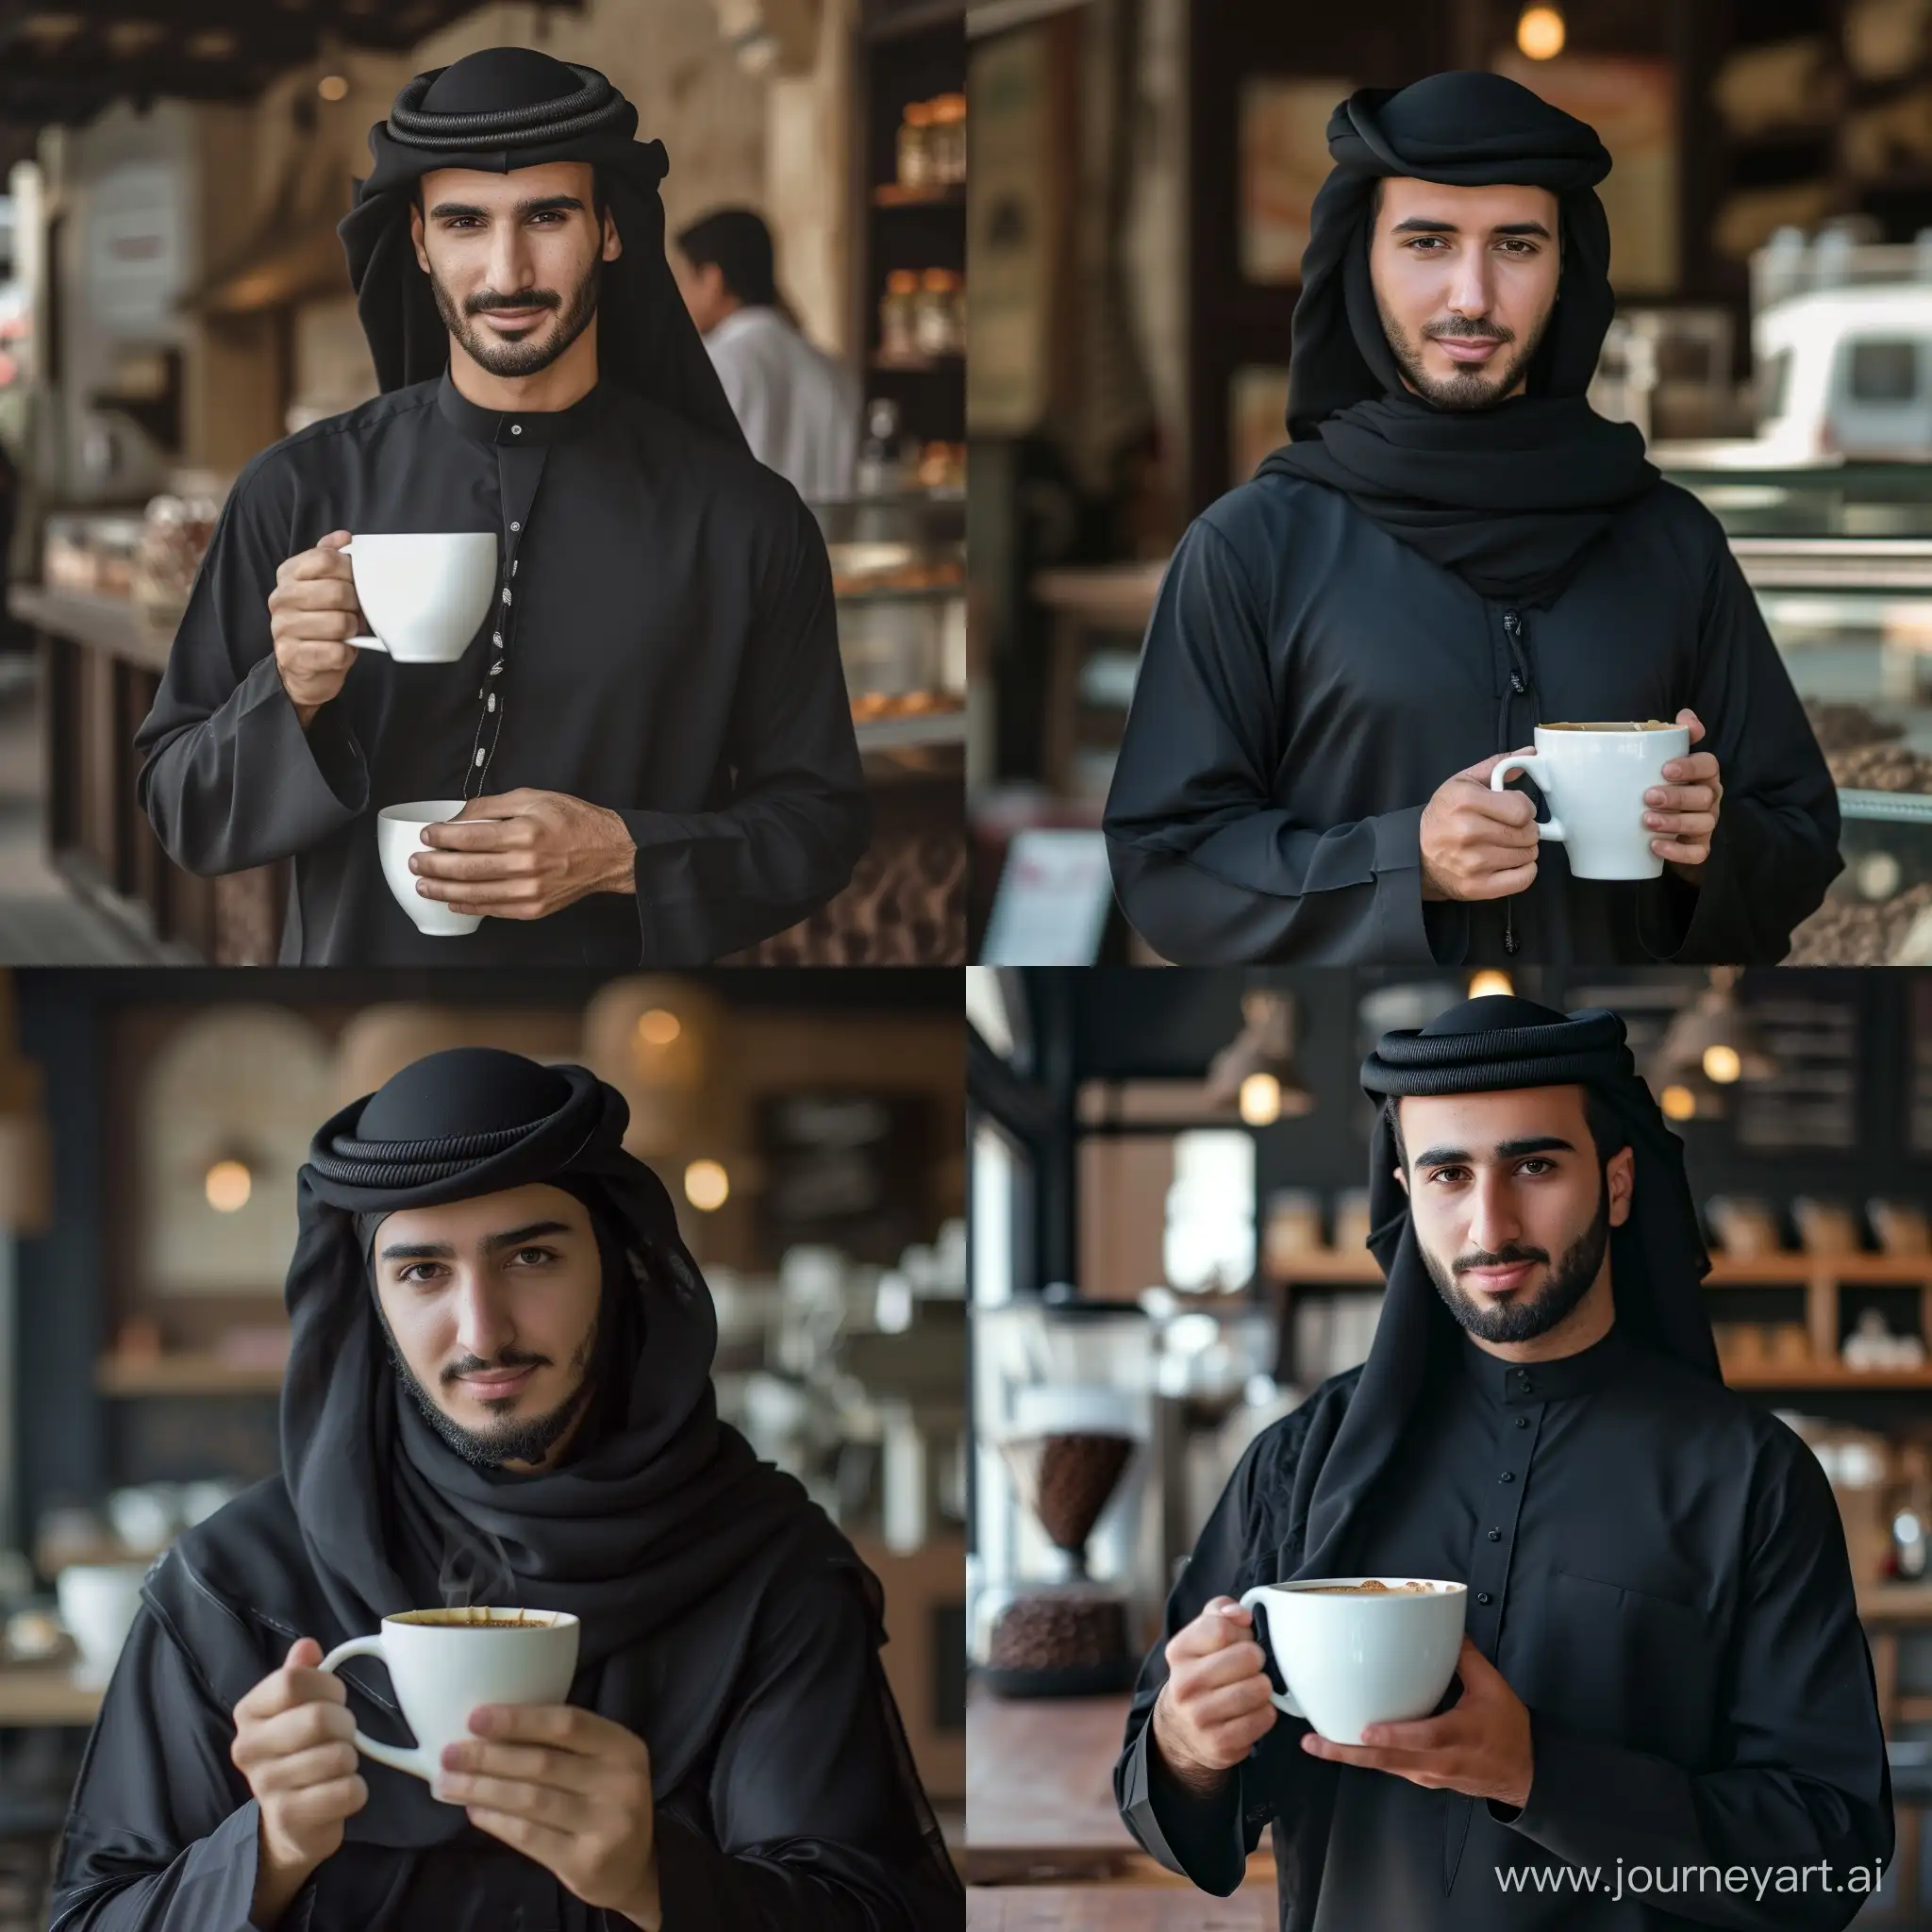 Real and natural photo of handsome man in black Arabic dress holding a cup of coffee. The coffee mug must be white. The space around him is a cafe. Full details of the coffee cup and the man's face, clothes and hands. natural light. Natural coffee beans.